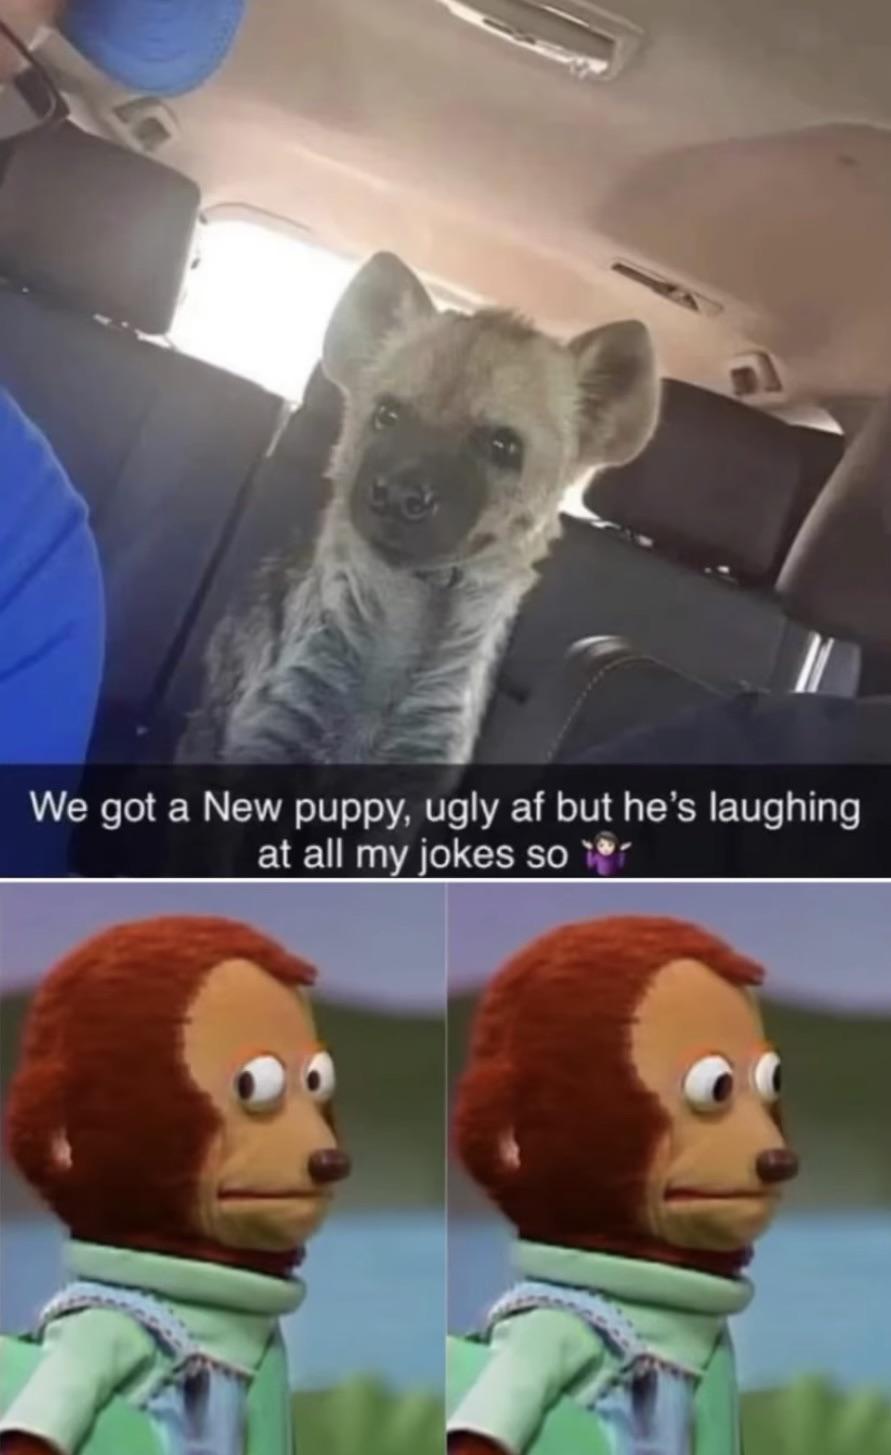 dank memes - funny memes - monkey looking away meme - We got a New puppy, ugly af but he's laughing at all my jokes so